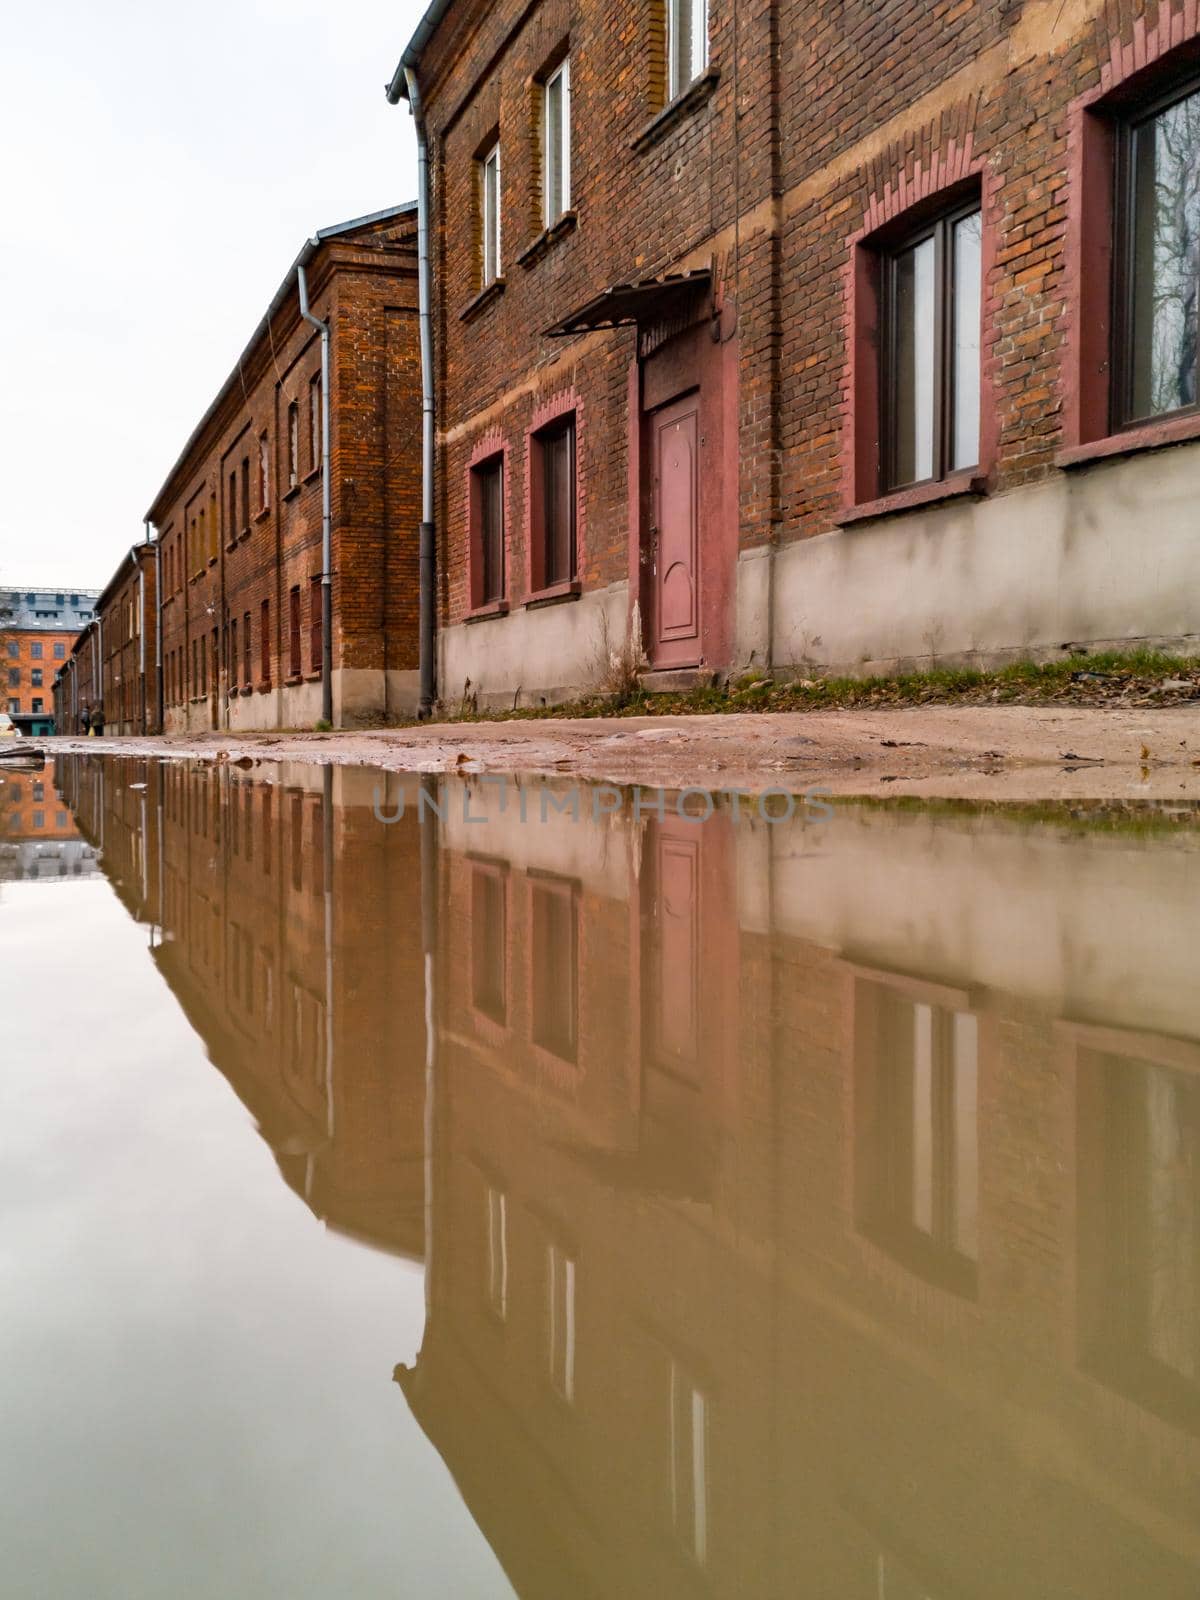 Row of old red brick tenement houses reflected in puddle